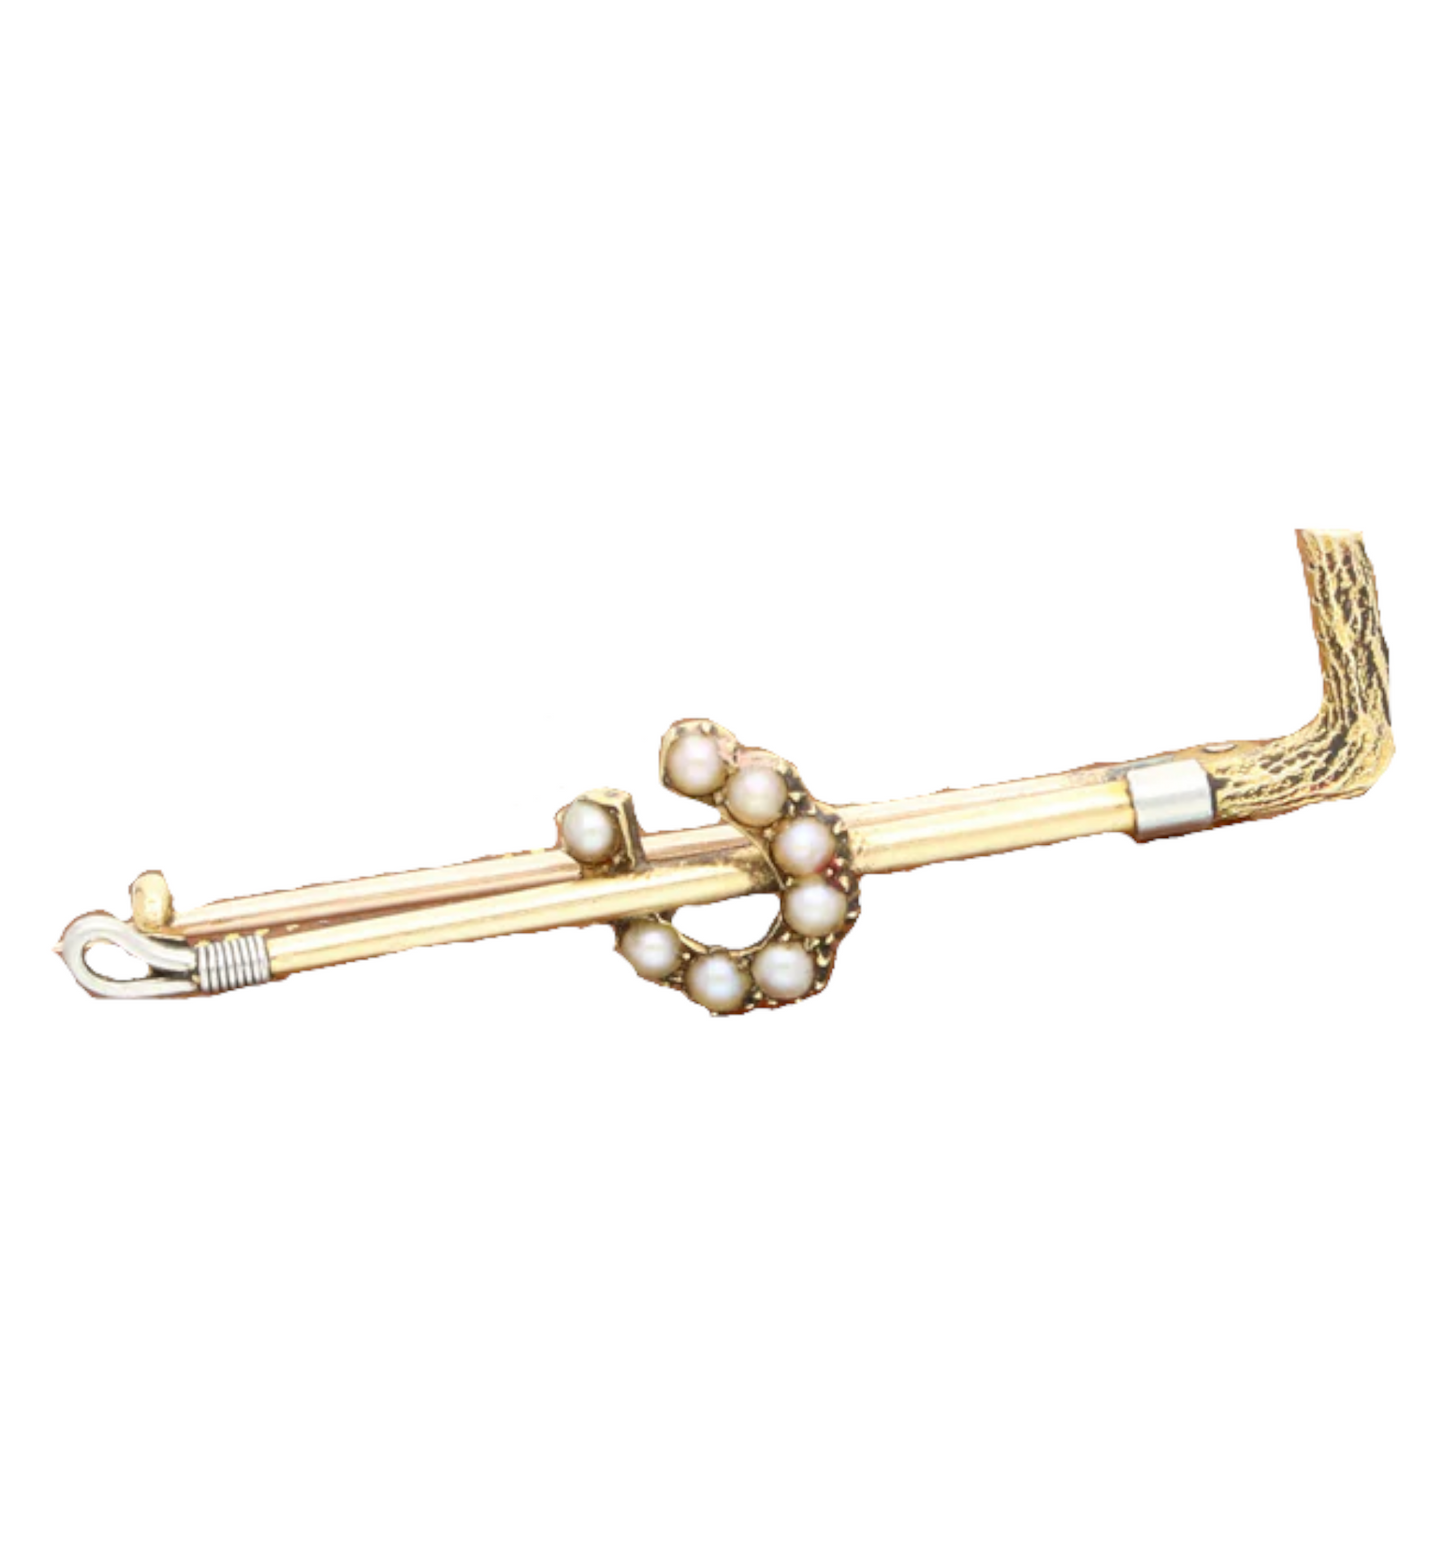 15ct yellow gold pearl set riding crop brooch